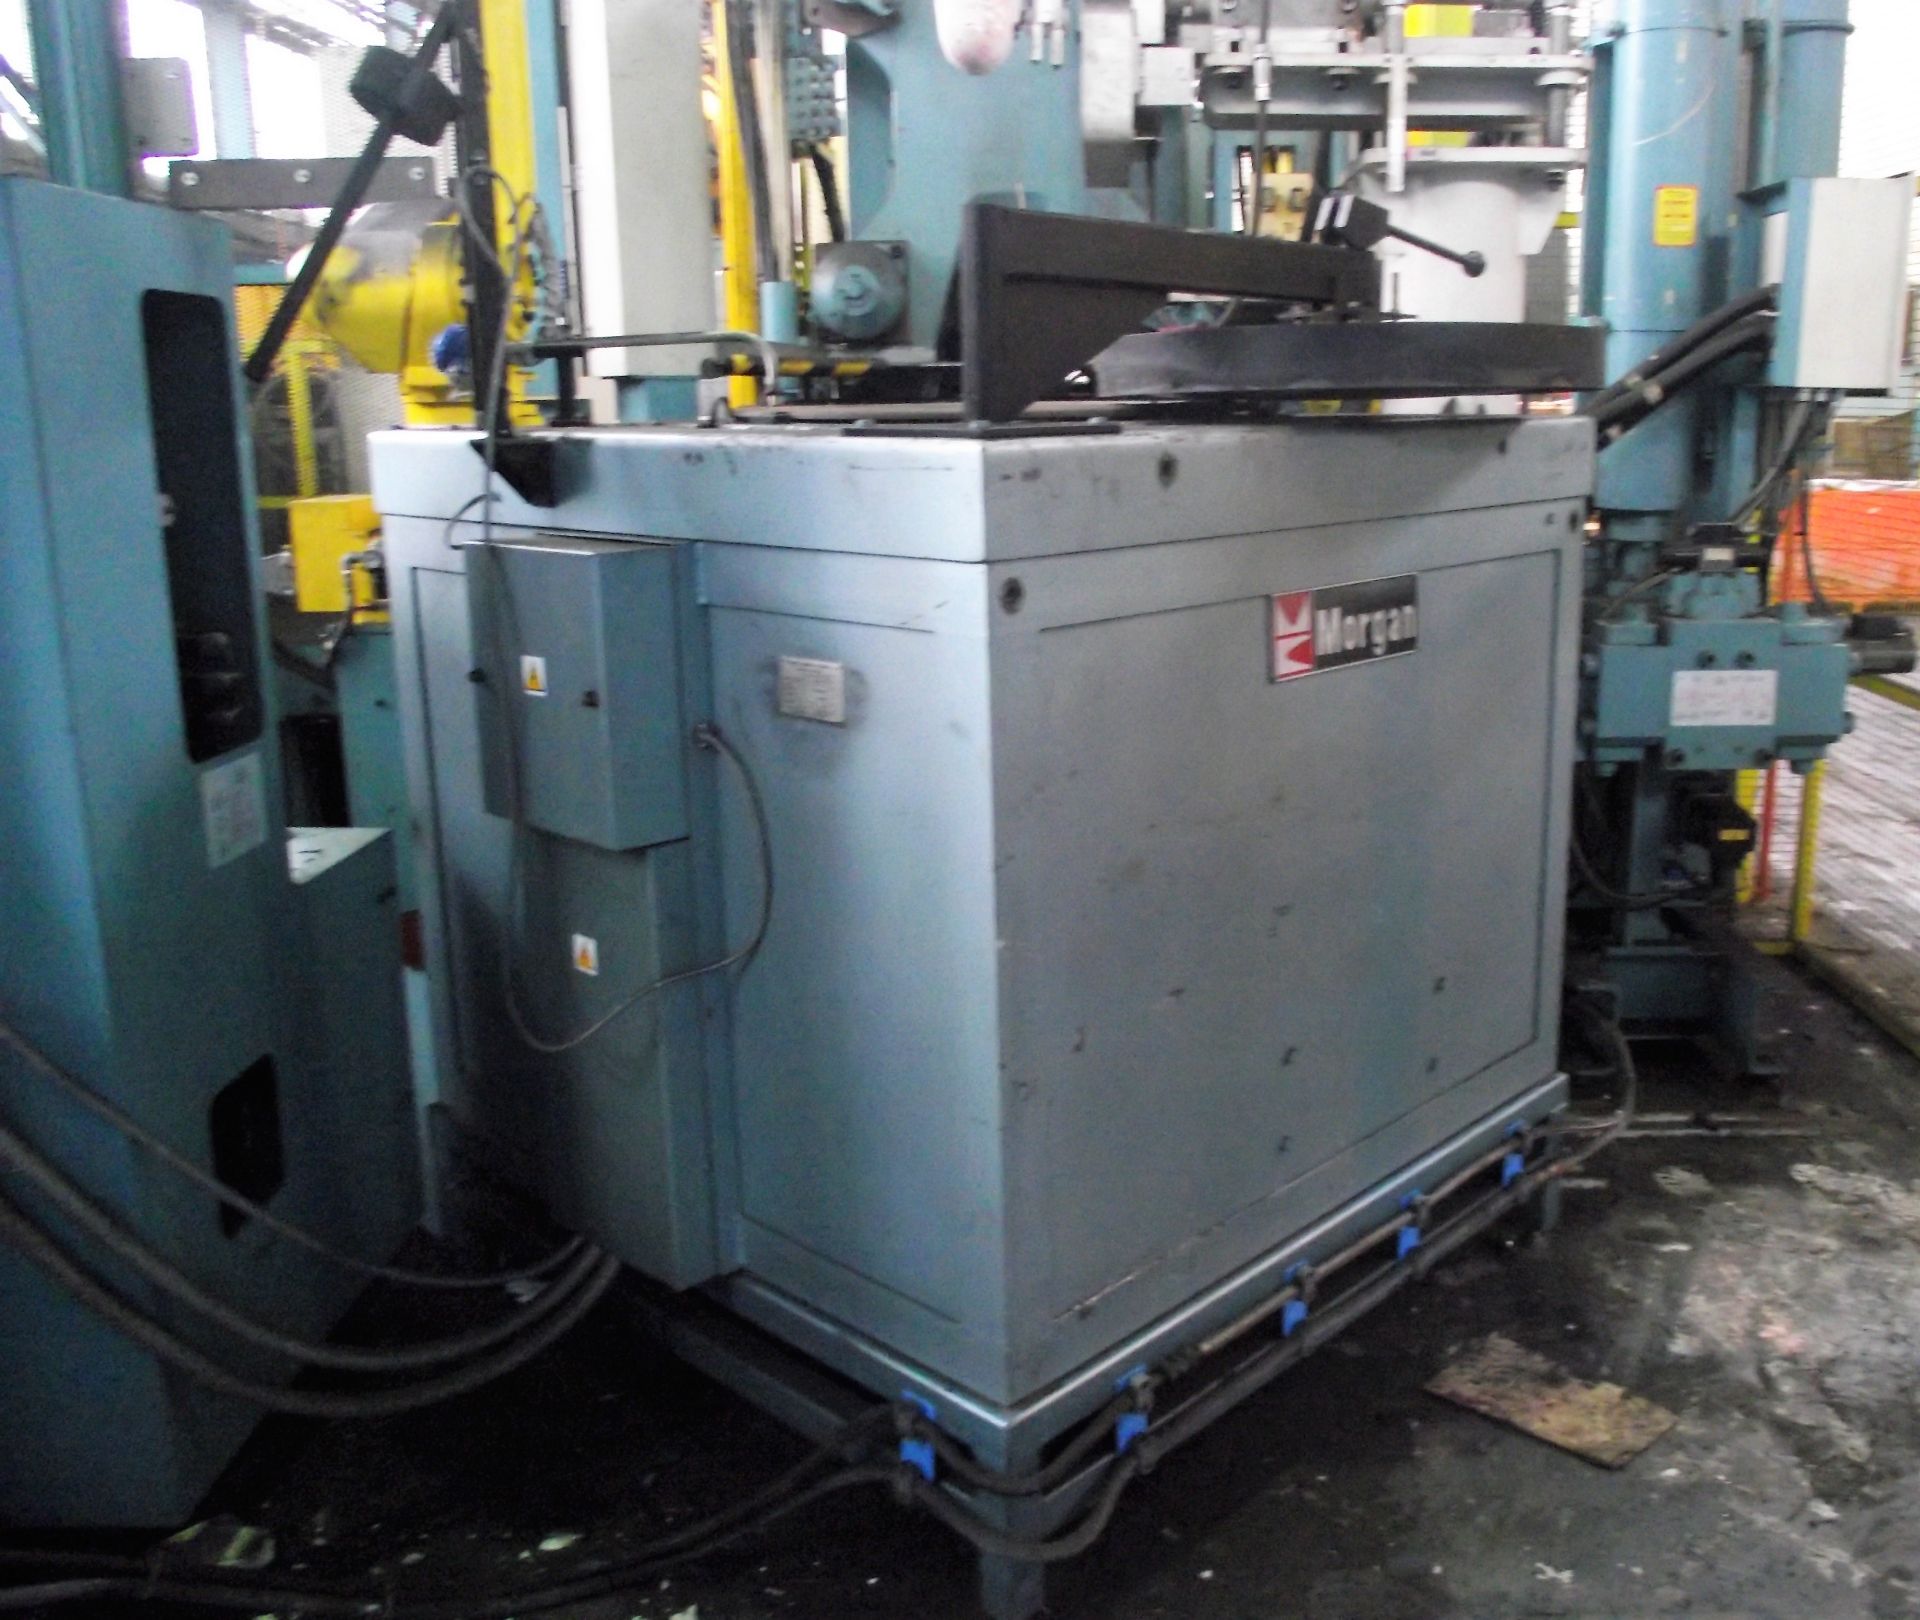 MORGAN 72KW ERBO (ELECTRICAL RESISTANCE BALE-OUT) FURNACE